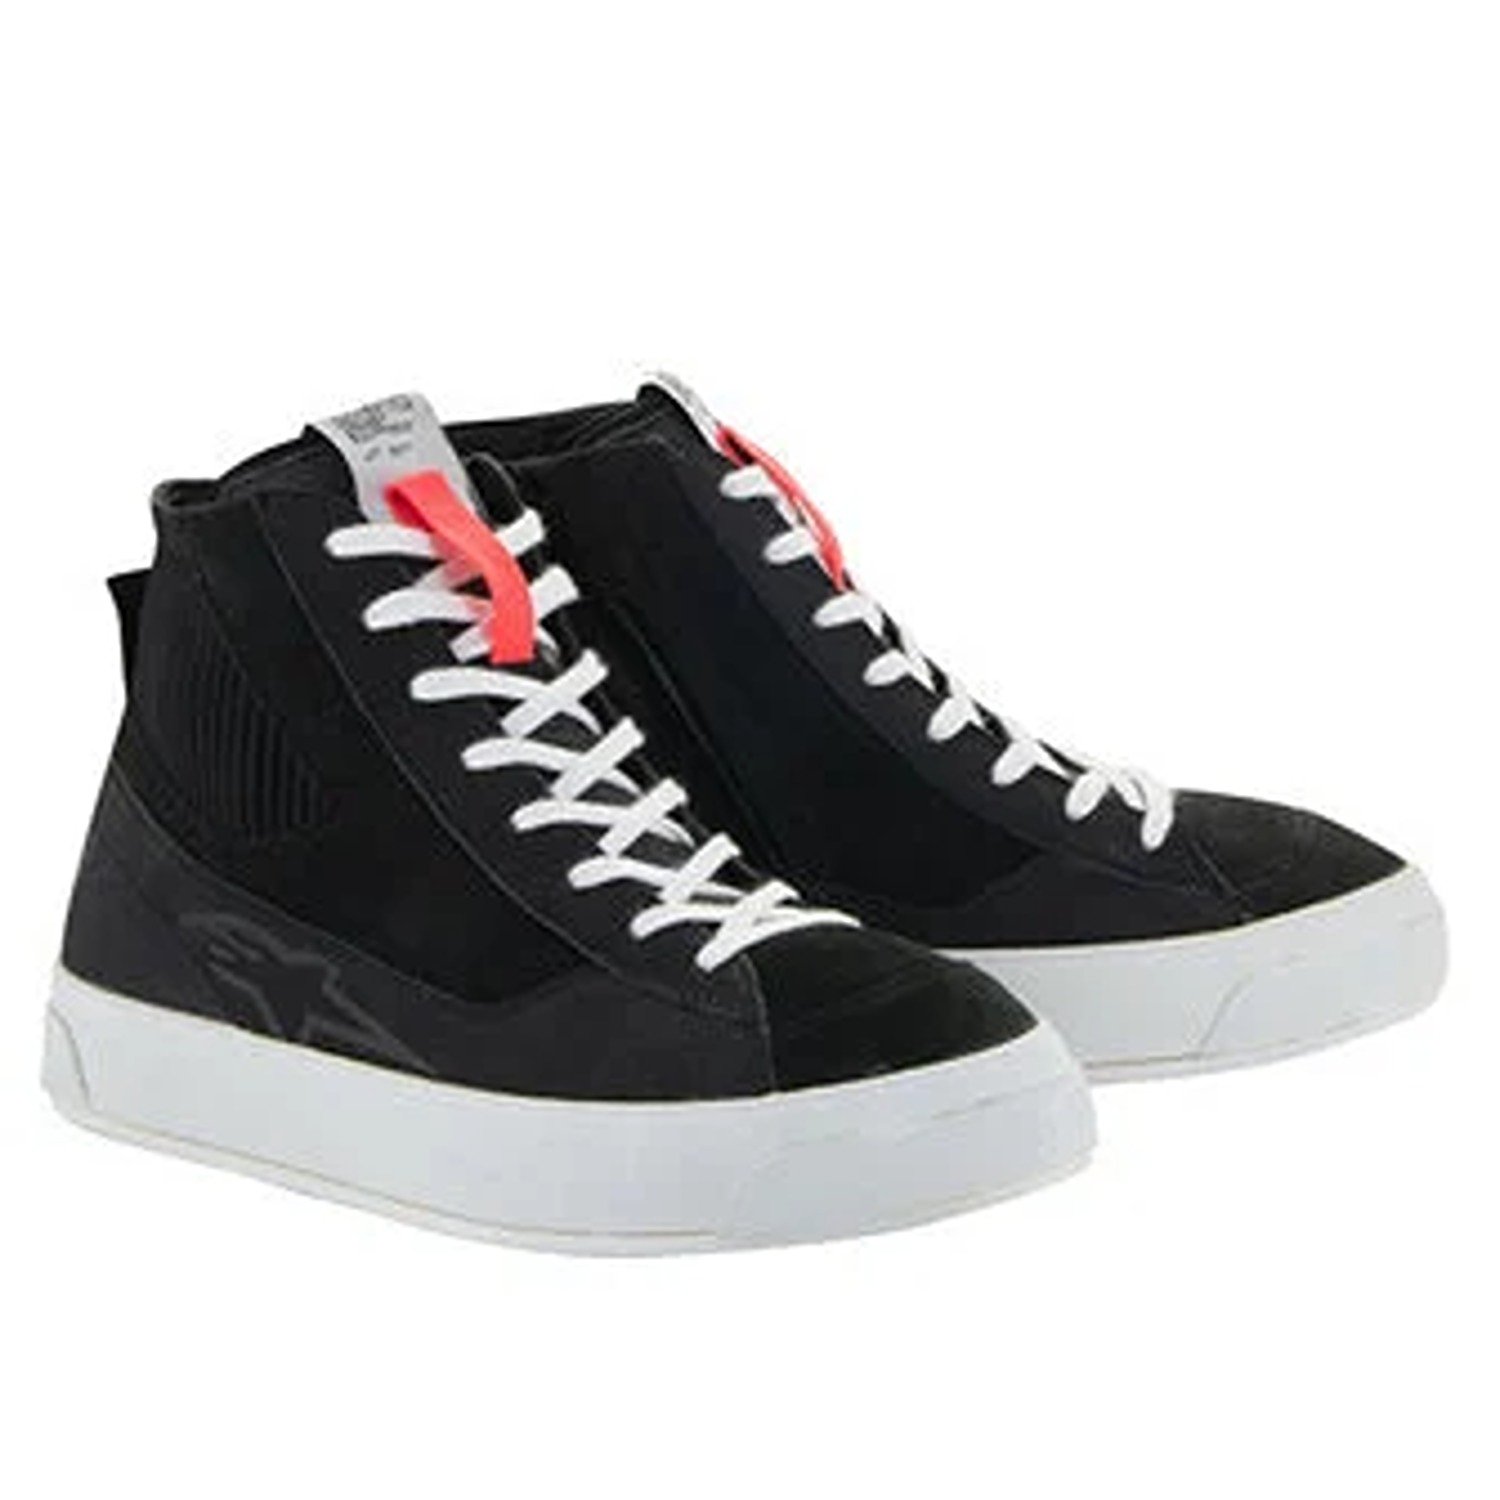 Image of EU Alpinestars Stated Shoes Black Taille US 135